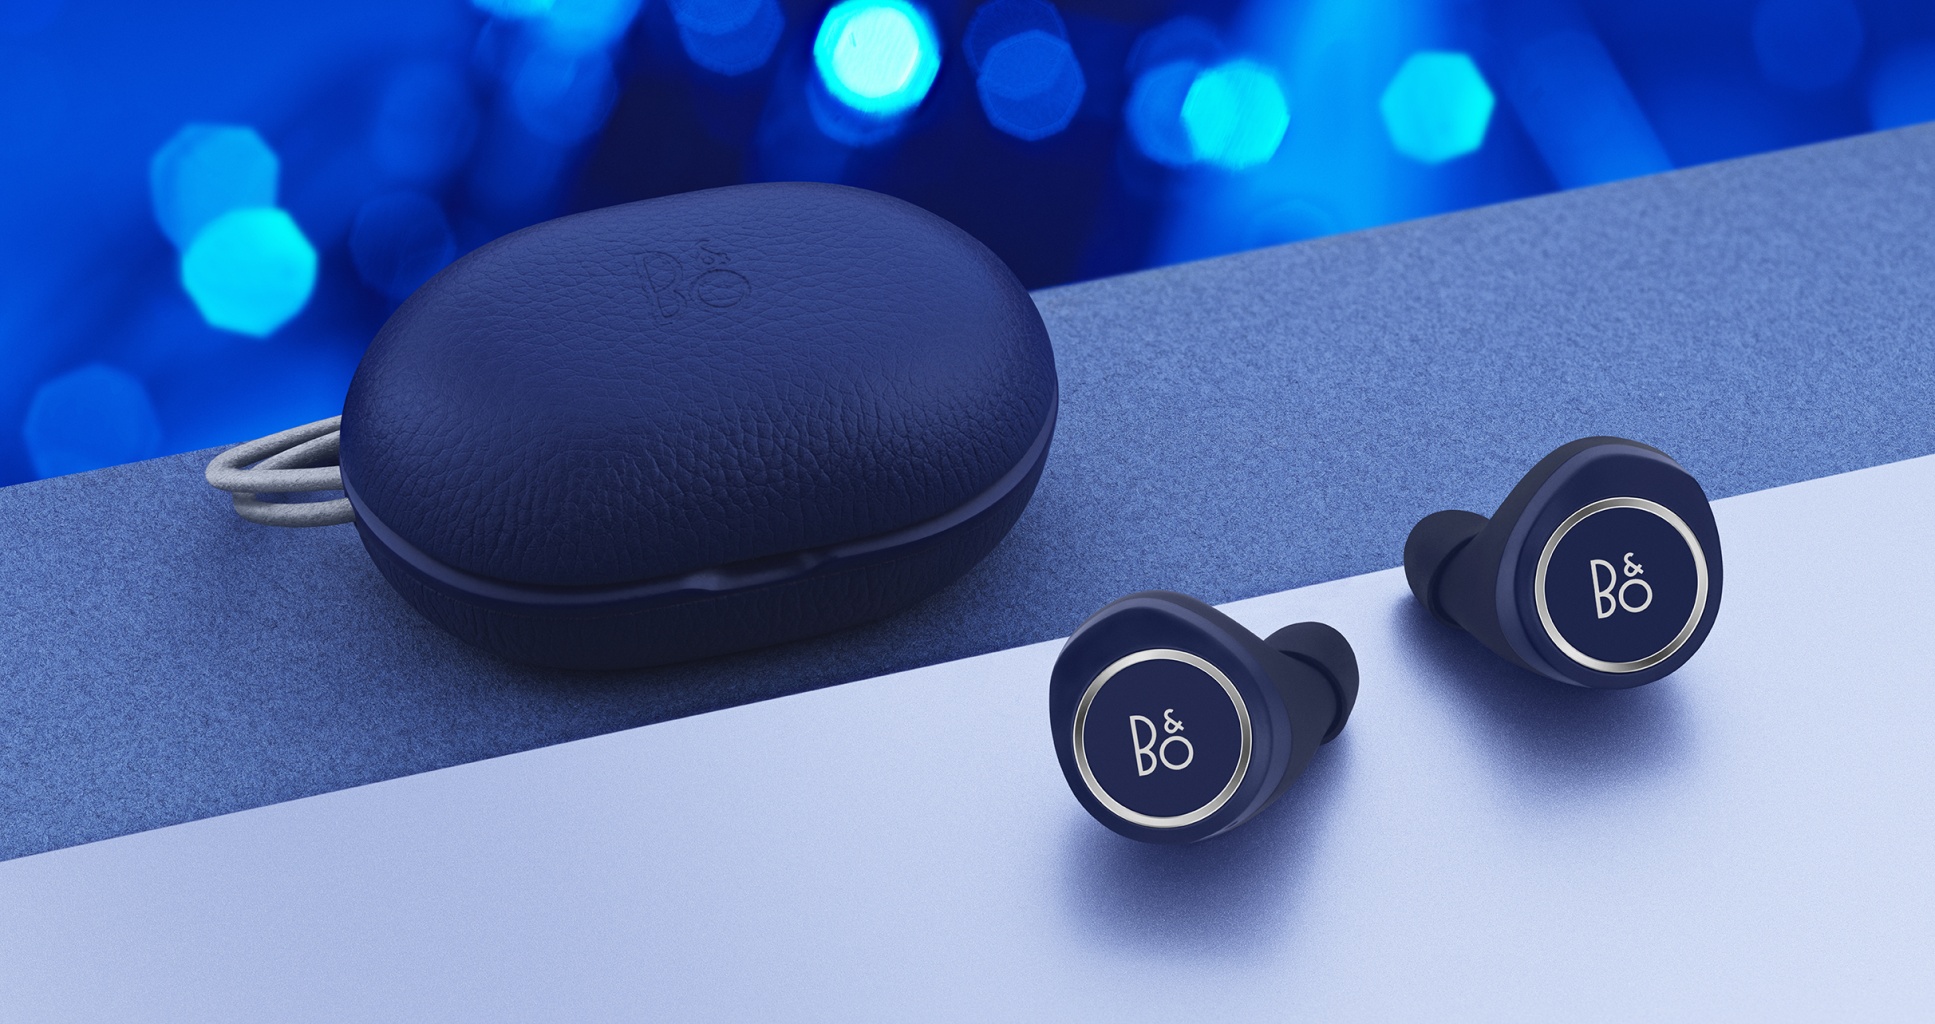 bang-olufsen-night-blue-collection-beoplay-e8-01.jpg